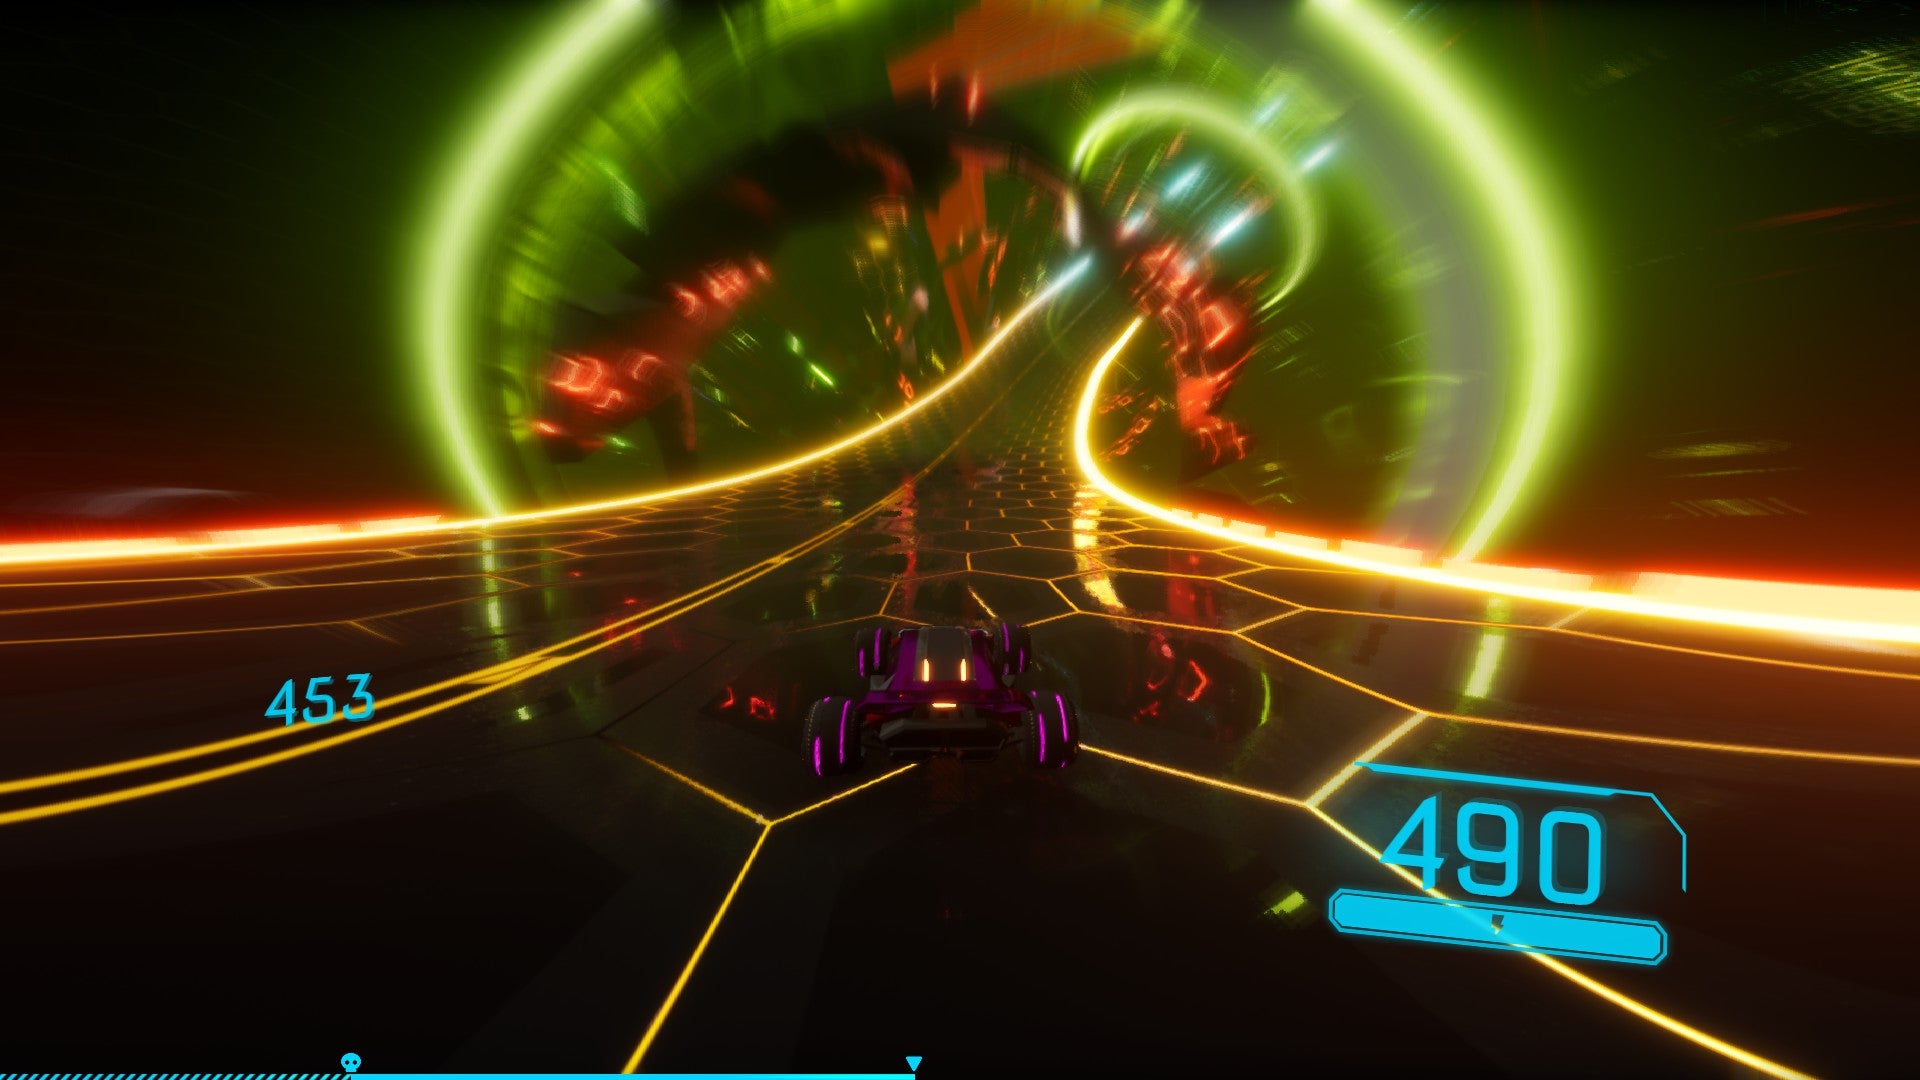 The car in Neodash races along a dark track surrounded by orange and green neon lights